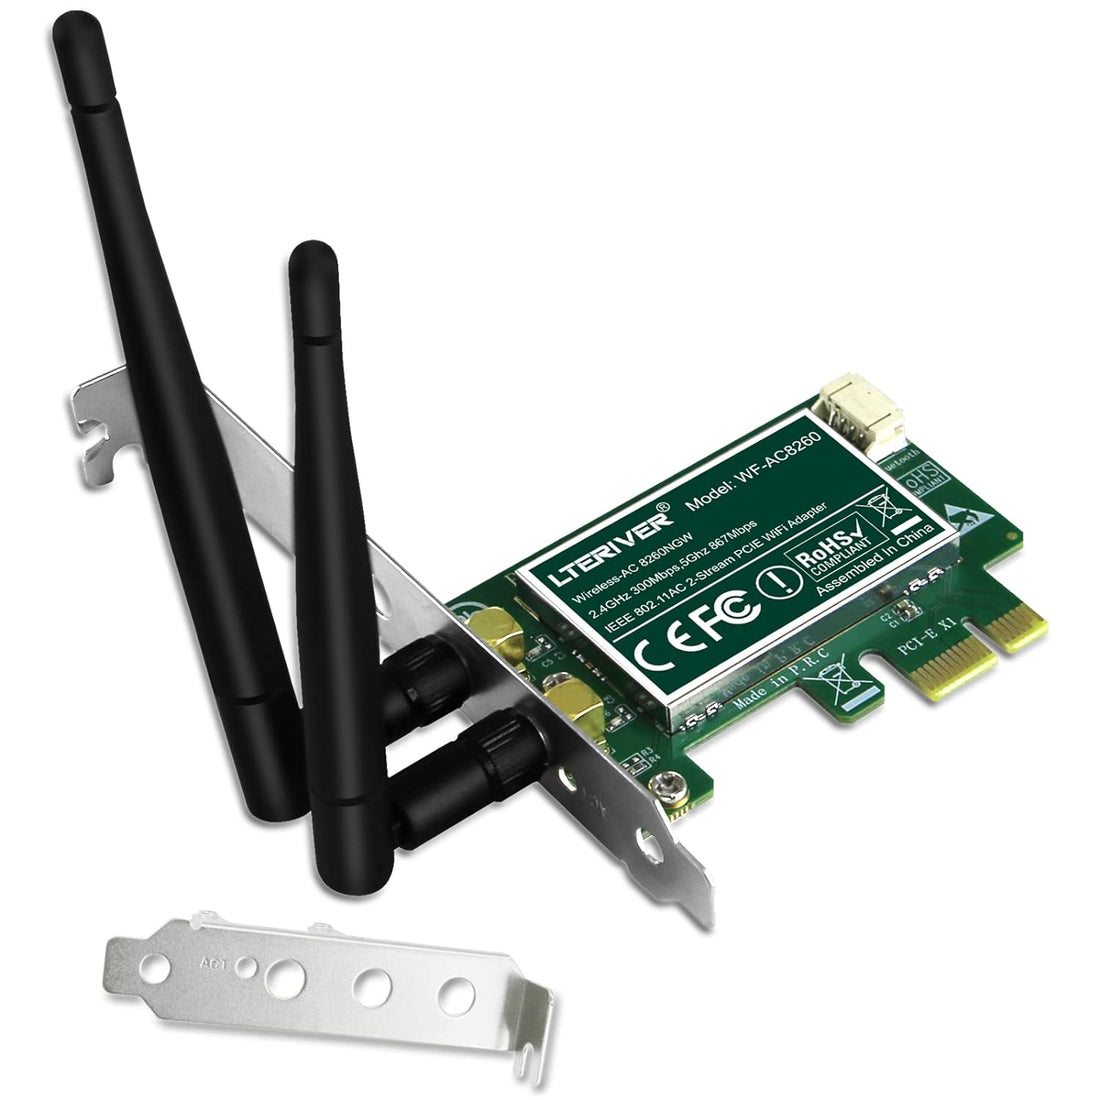 LTERIVER Wireless-AC Dual Band 1200Mbps PCIE Wi-Fi Adapter for Windows 7 (32/64bit) and Windows 8.x, 10, 11 64bit Desktop PCs, 2.4GHz 300Mbps and 5GHz 867Mbps PCIE Wi-Fi Card (WF-AC8260)